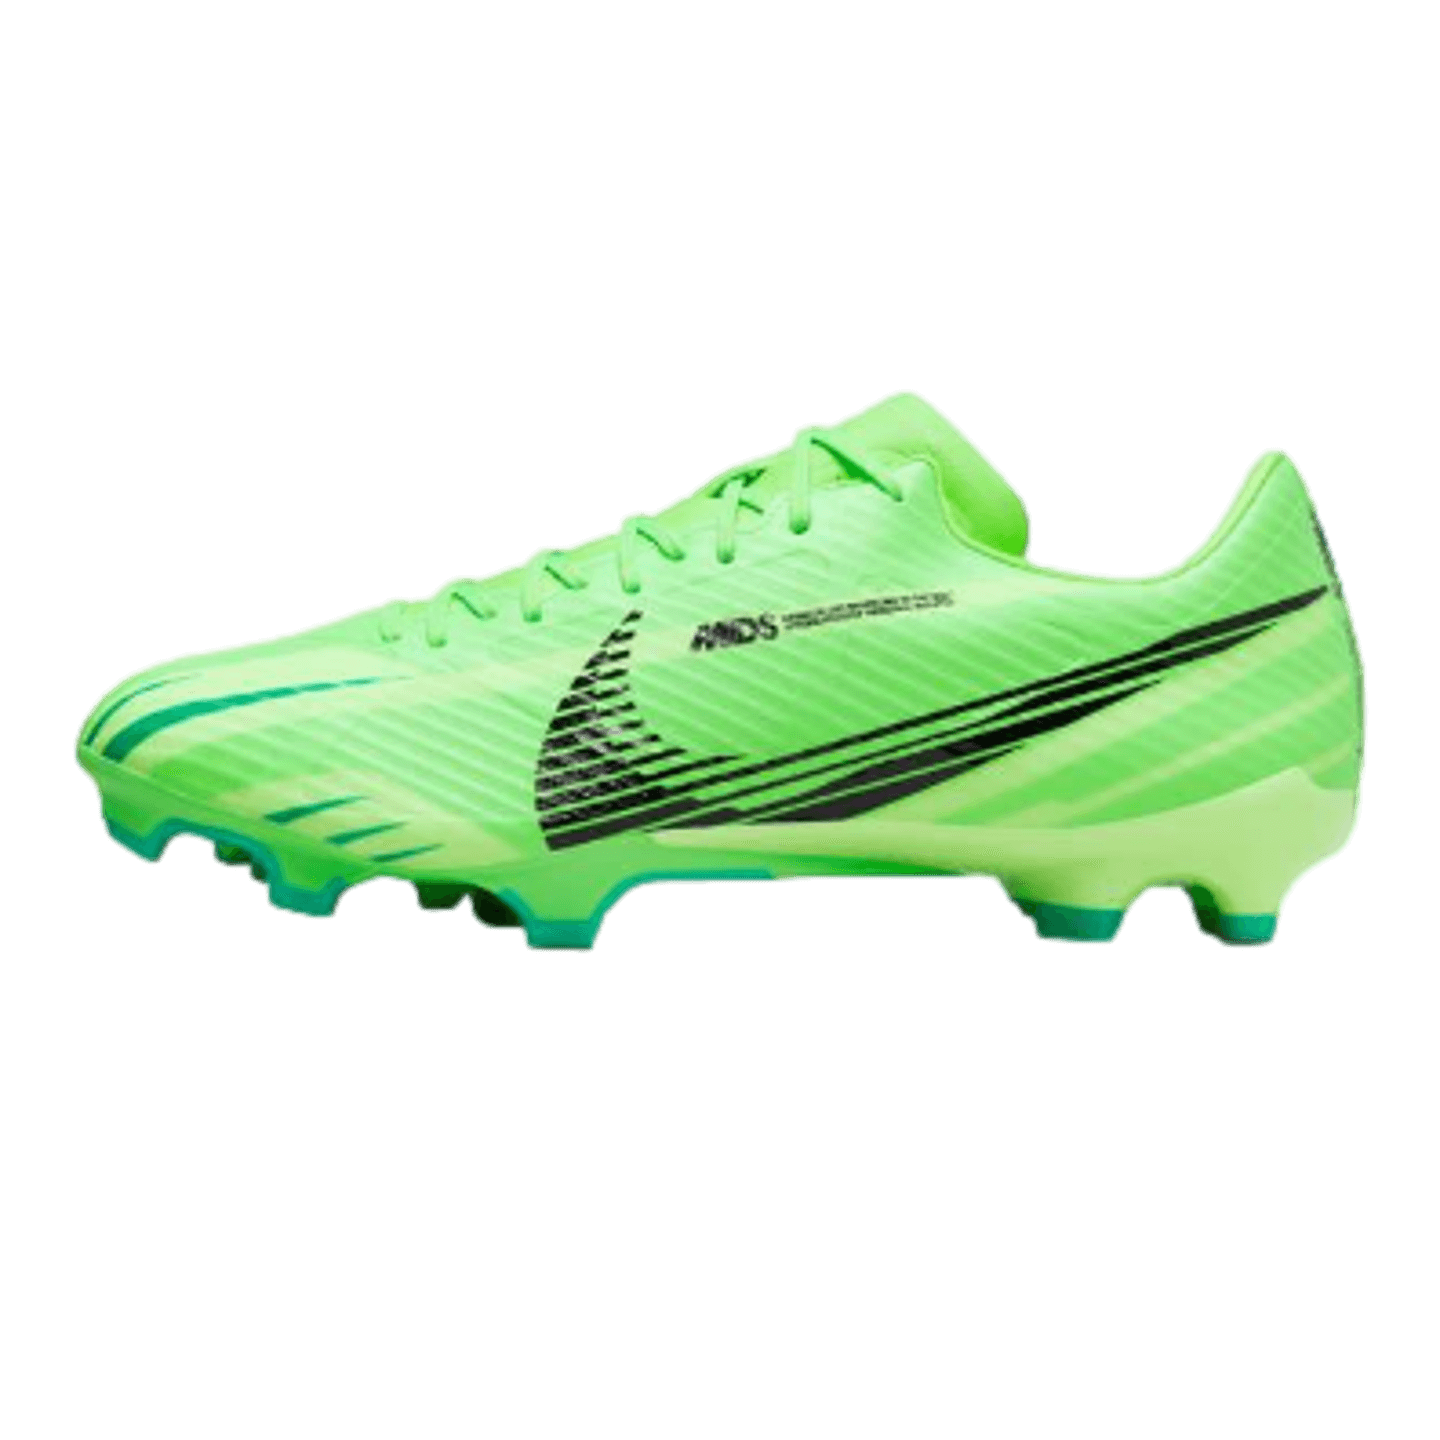 Nike Mercurial Vapor 15 Academy MDS Firm Ground Cleats